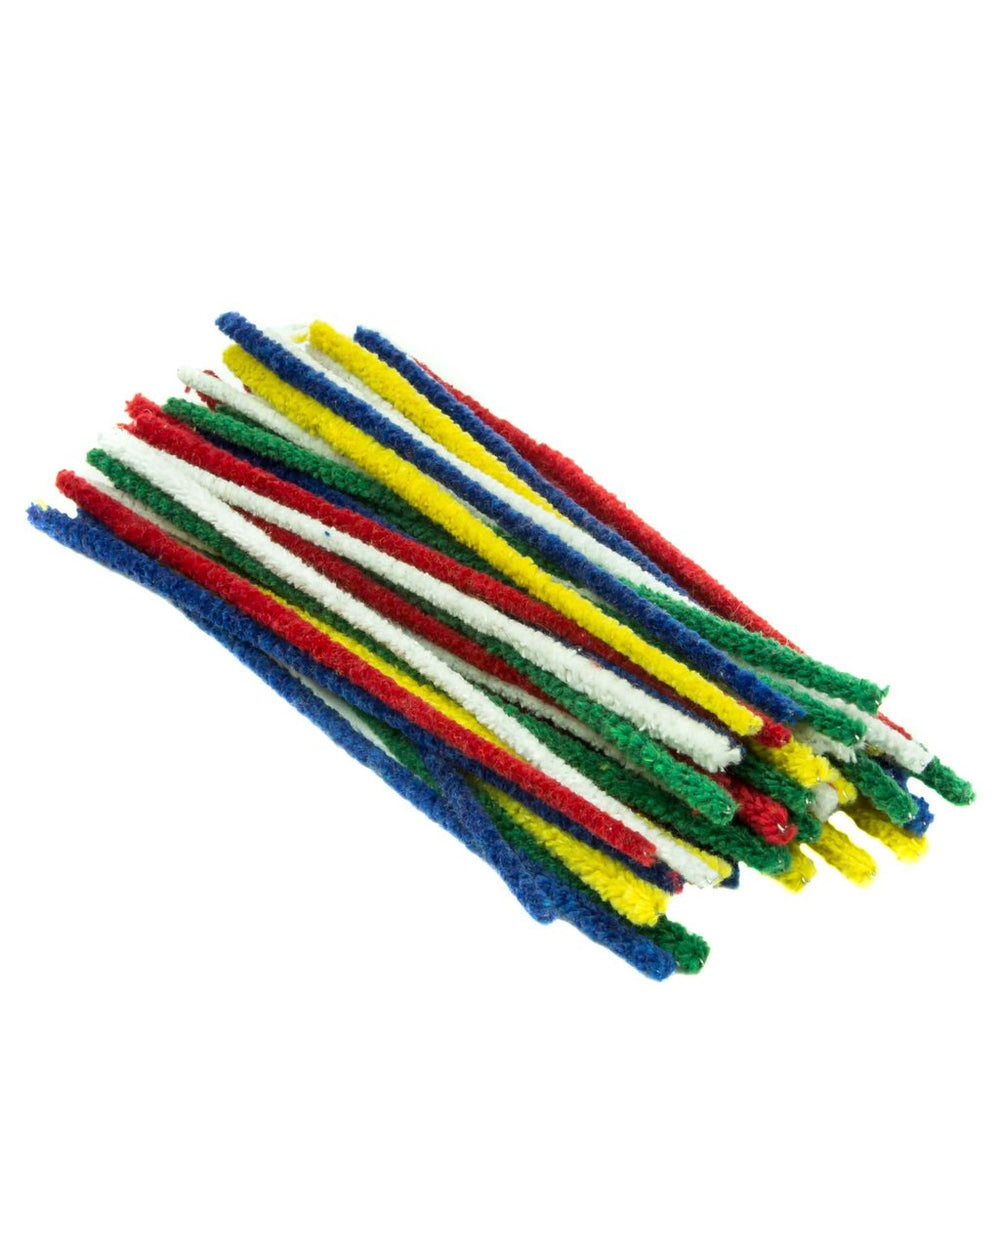 Accessories 50 Pack of Pipe Cleaners